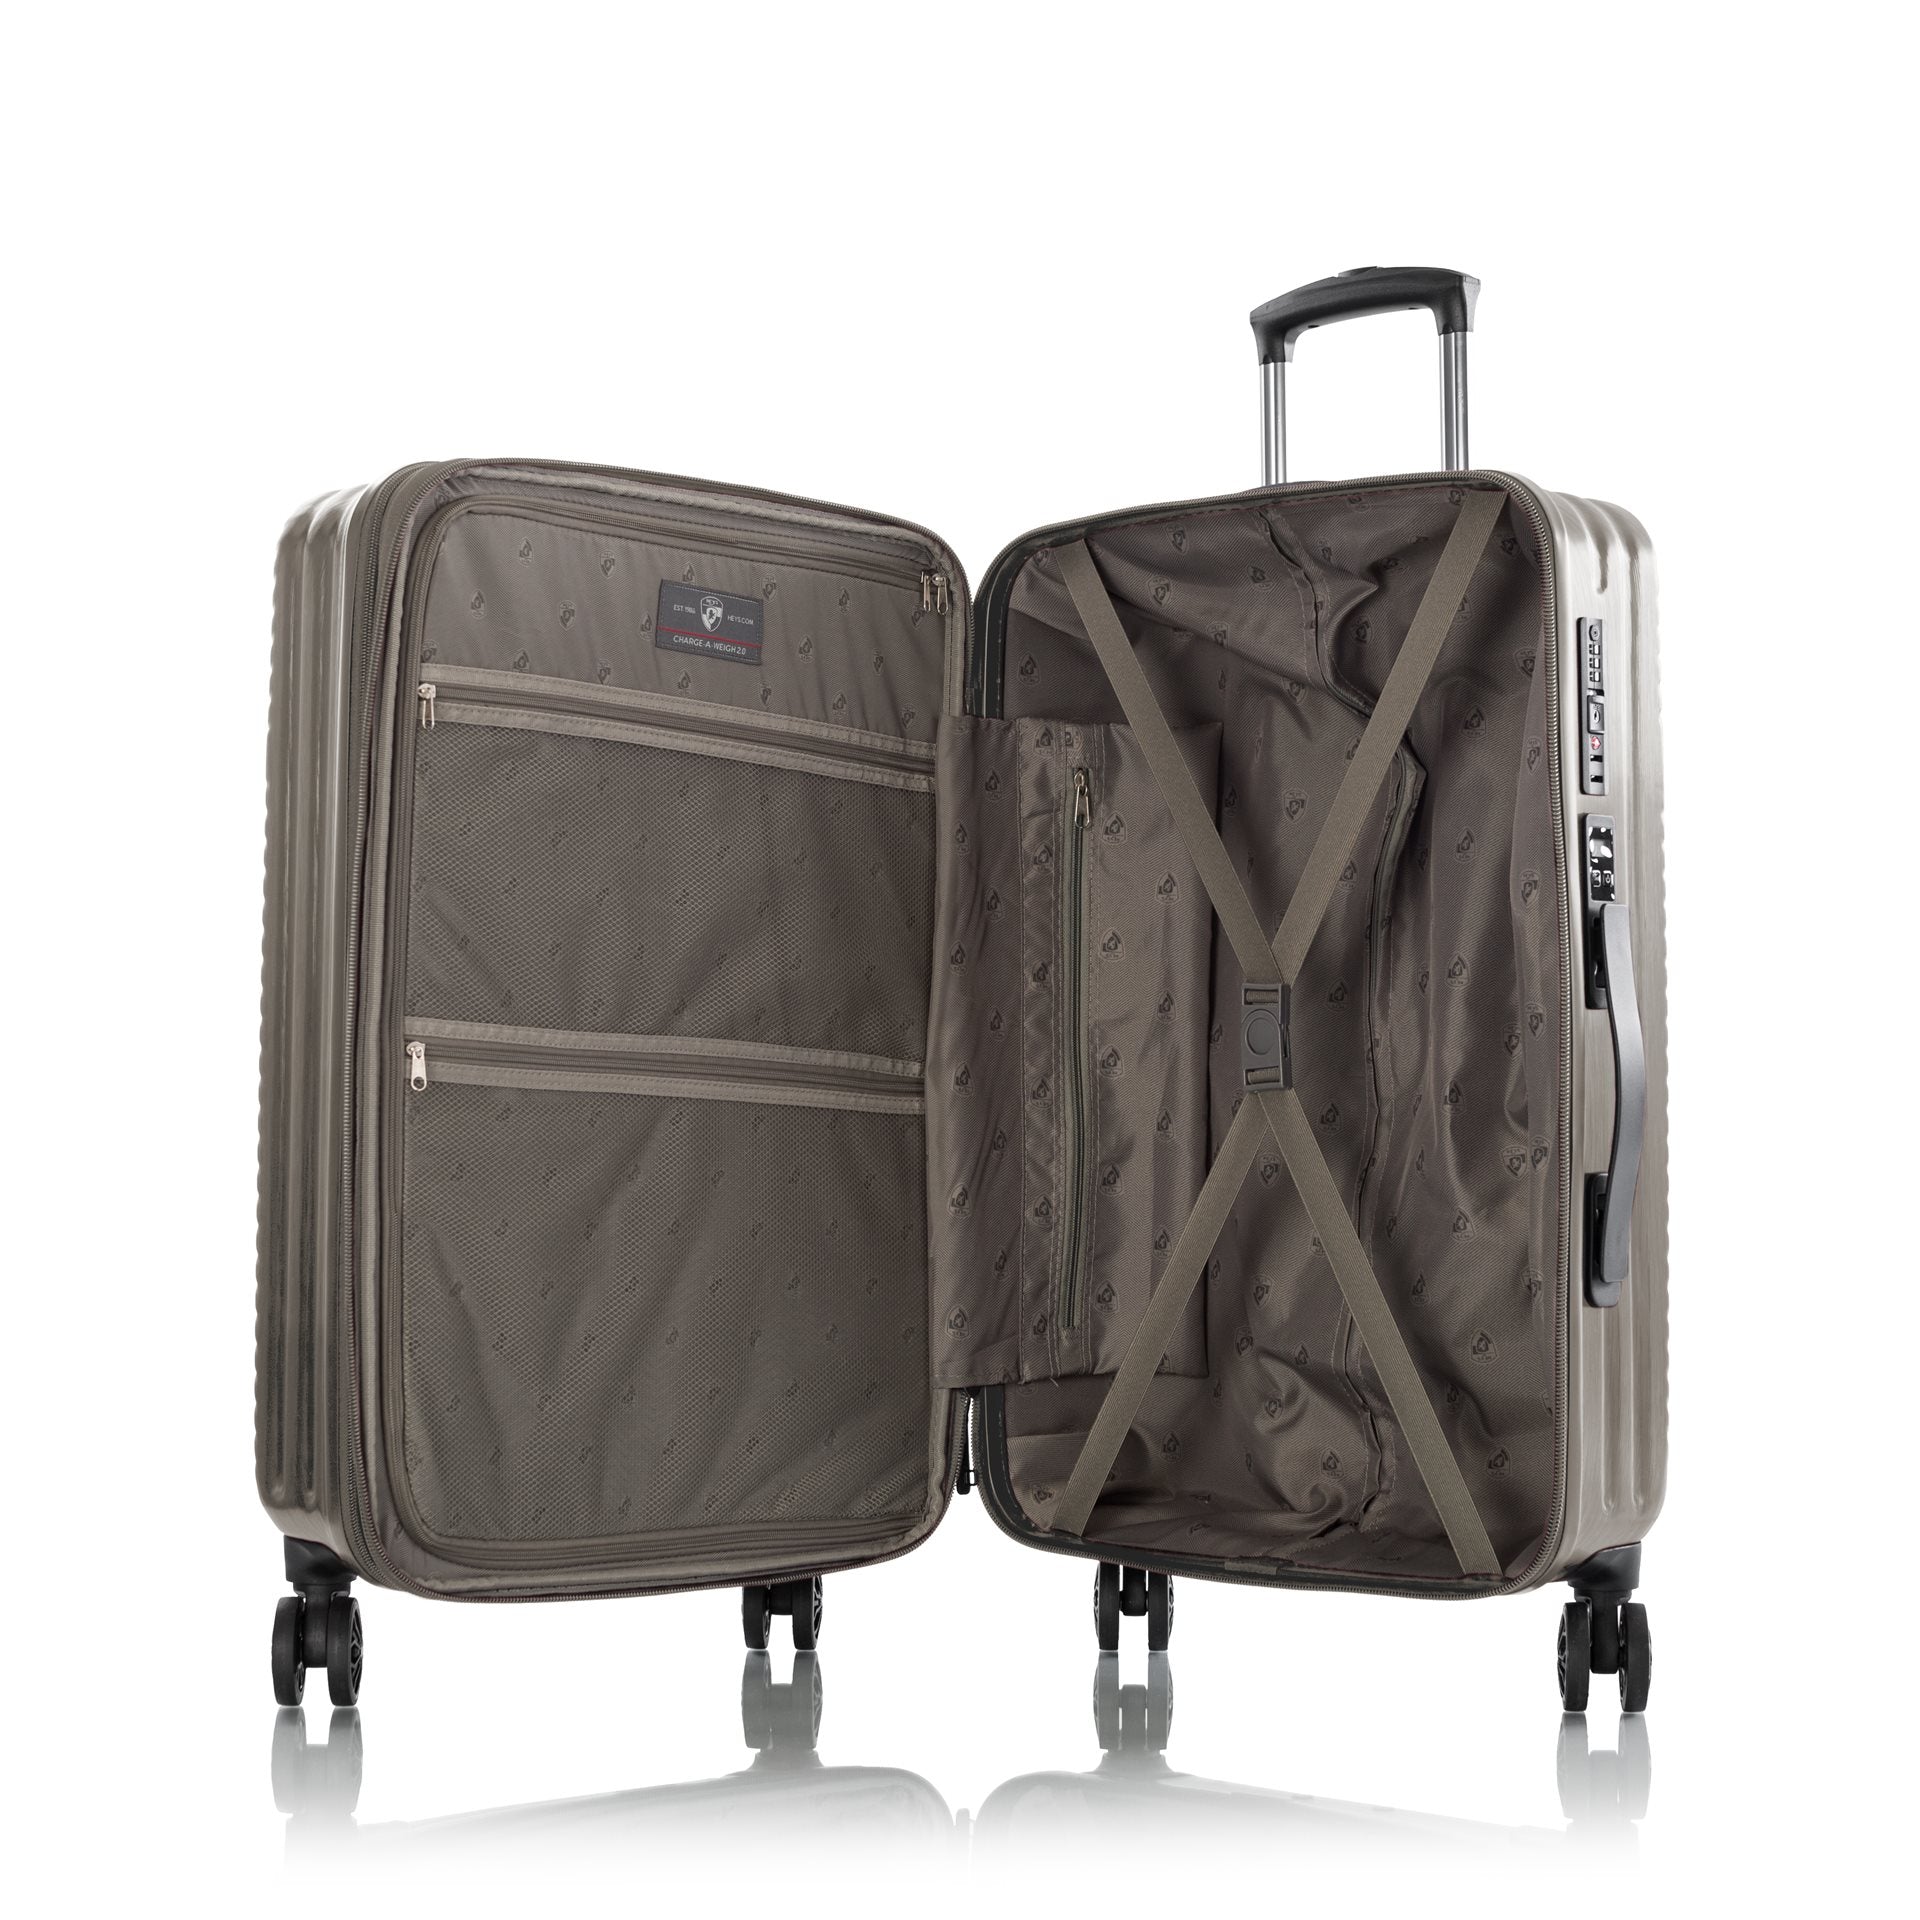 Heys Charge-A-Weigh 2.0 Koffer 26" (66 cm) - Taupe Ruimbagage Koffer - Reisartikelen-nl